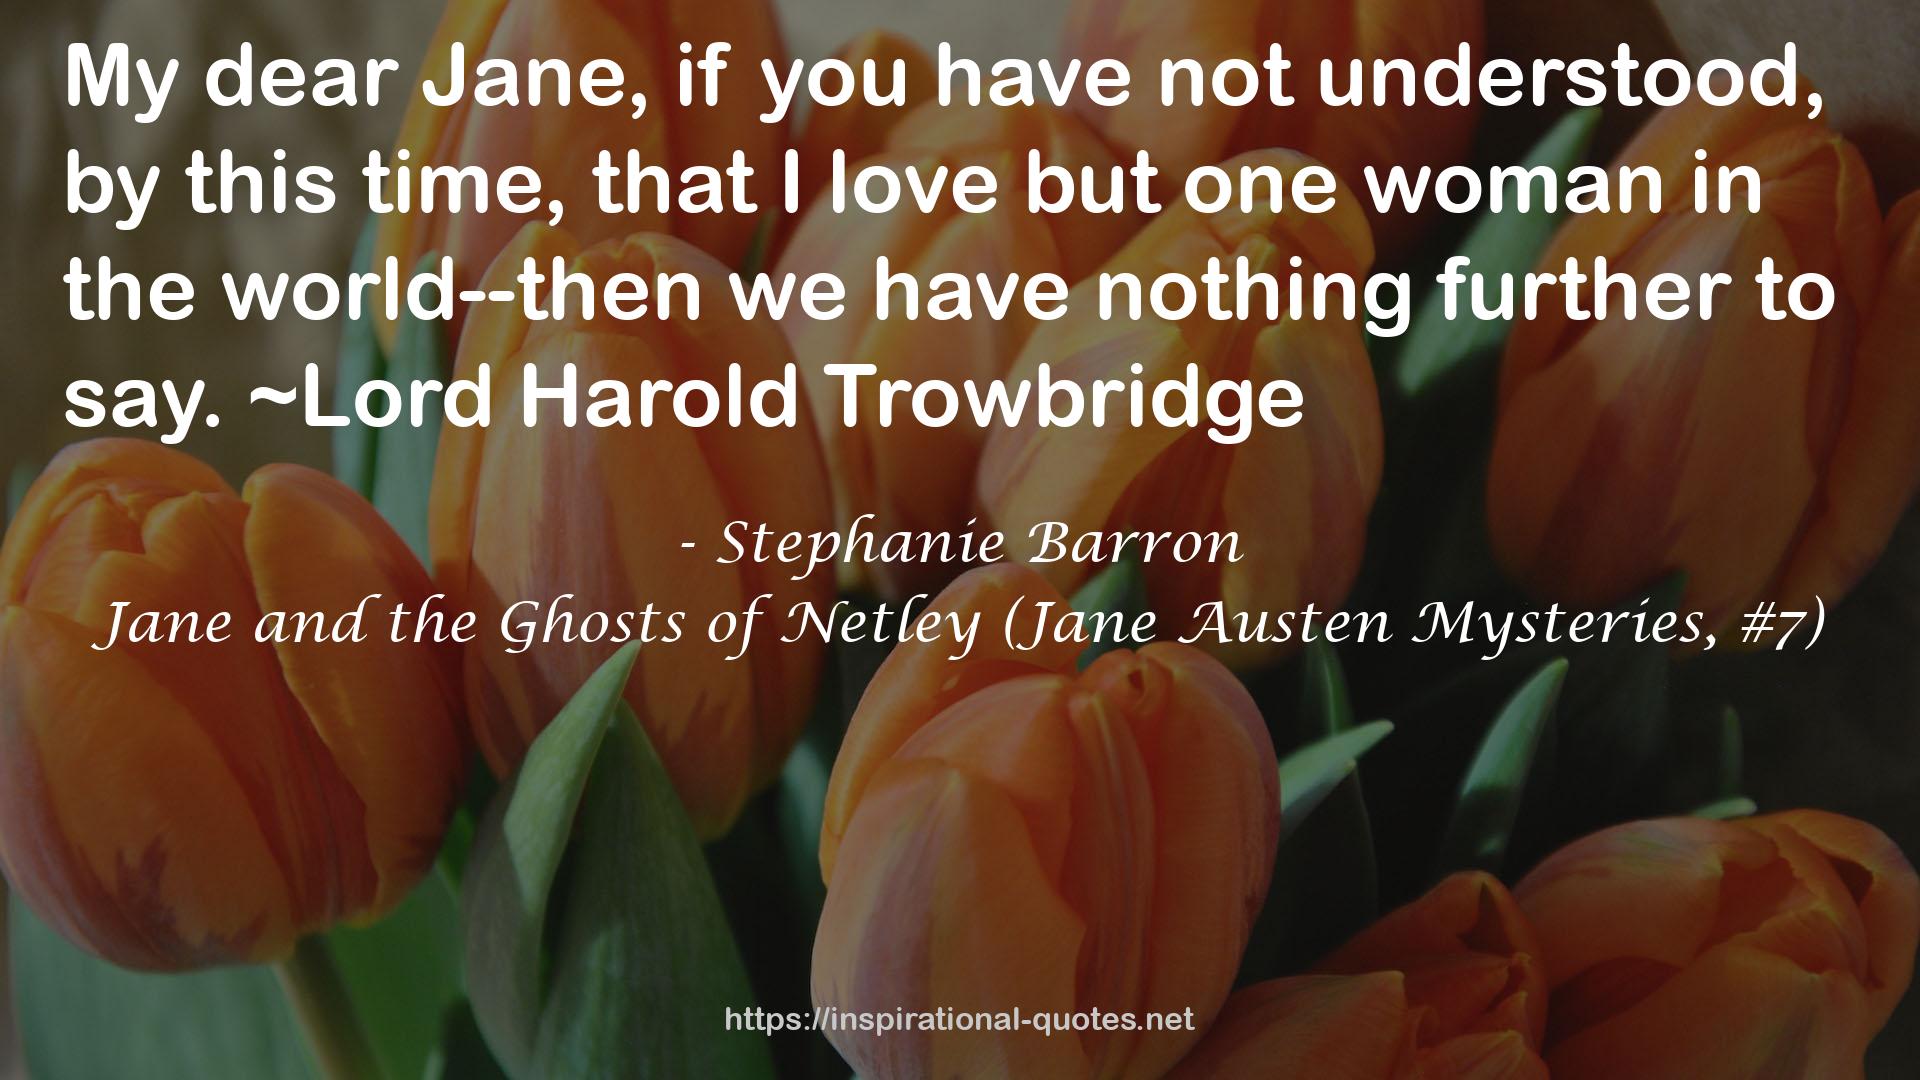 Jane and the Ghosts of Netley (Jane Austen Mysteries, #7) QUOTES